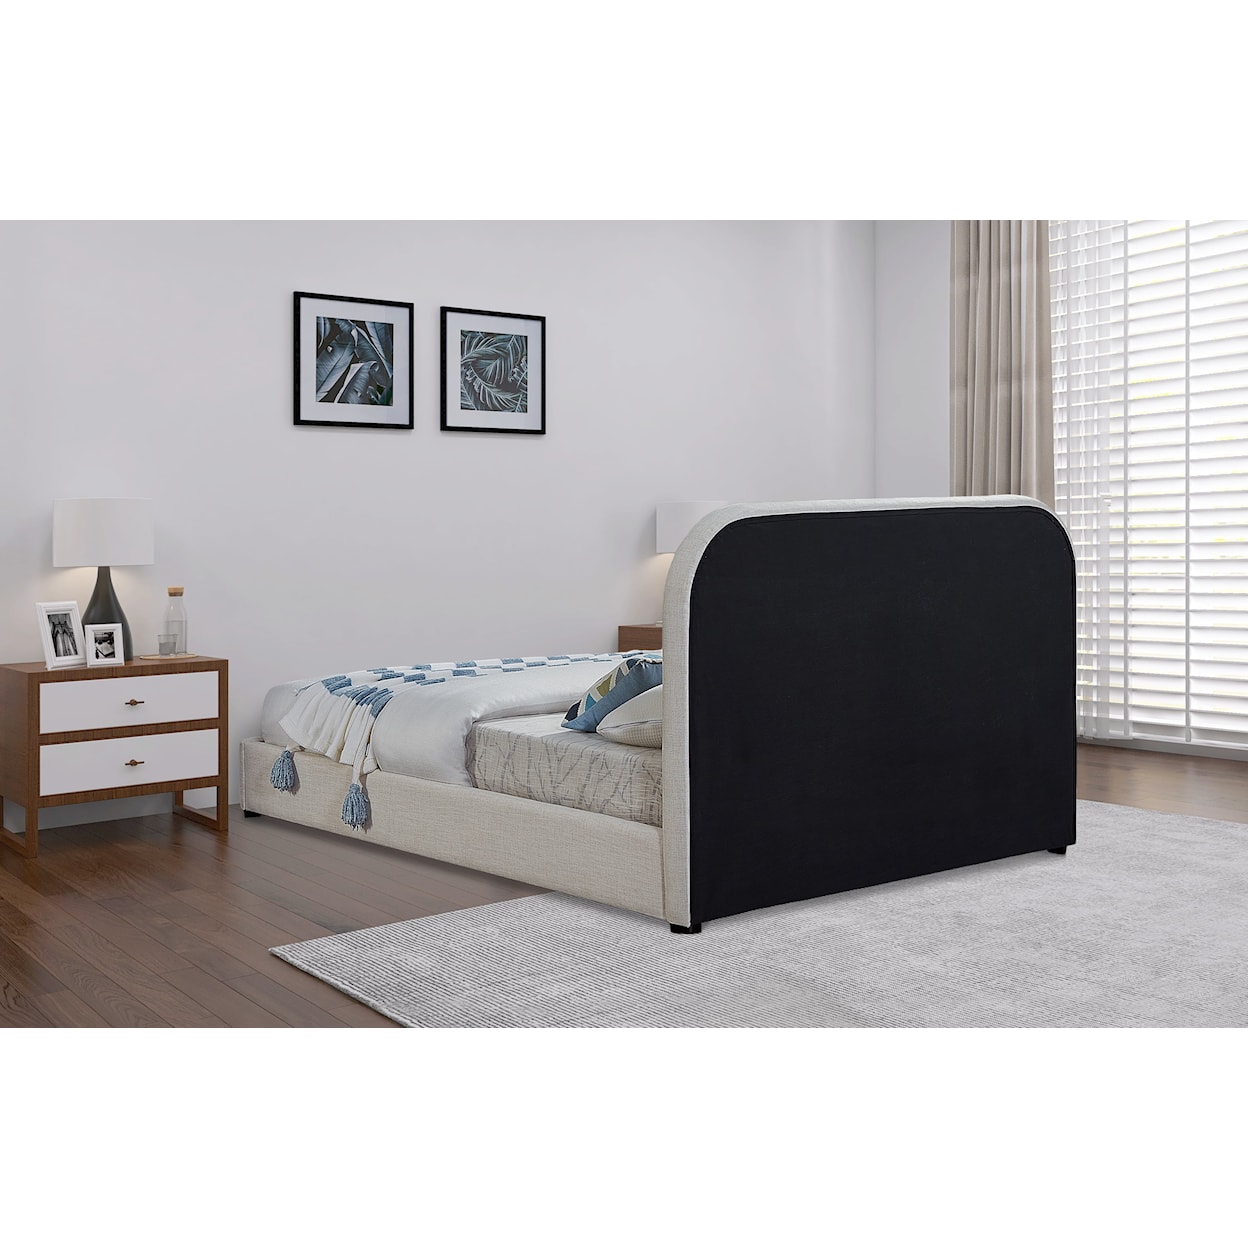 Meridian Furniture Blake Upholstered Low-Profile Queen Bed